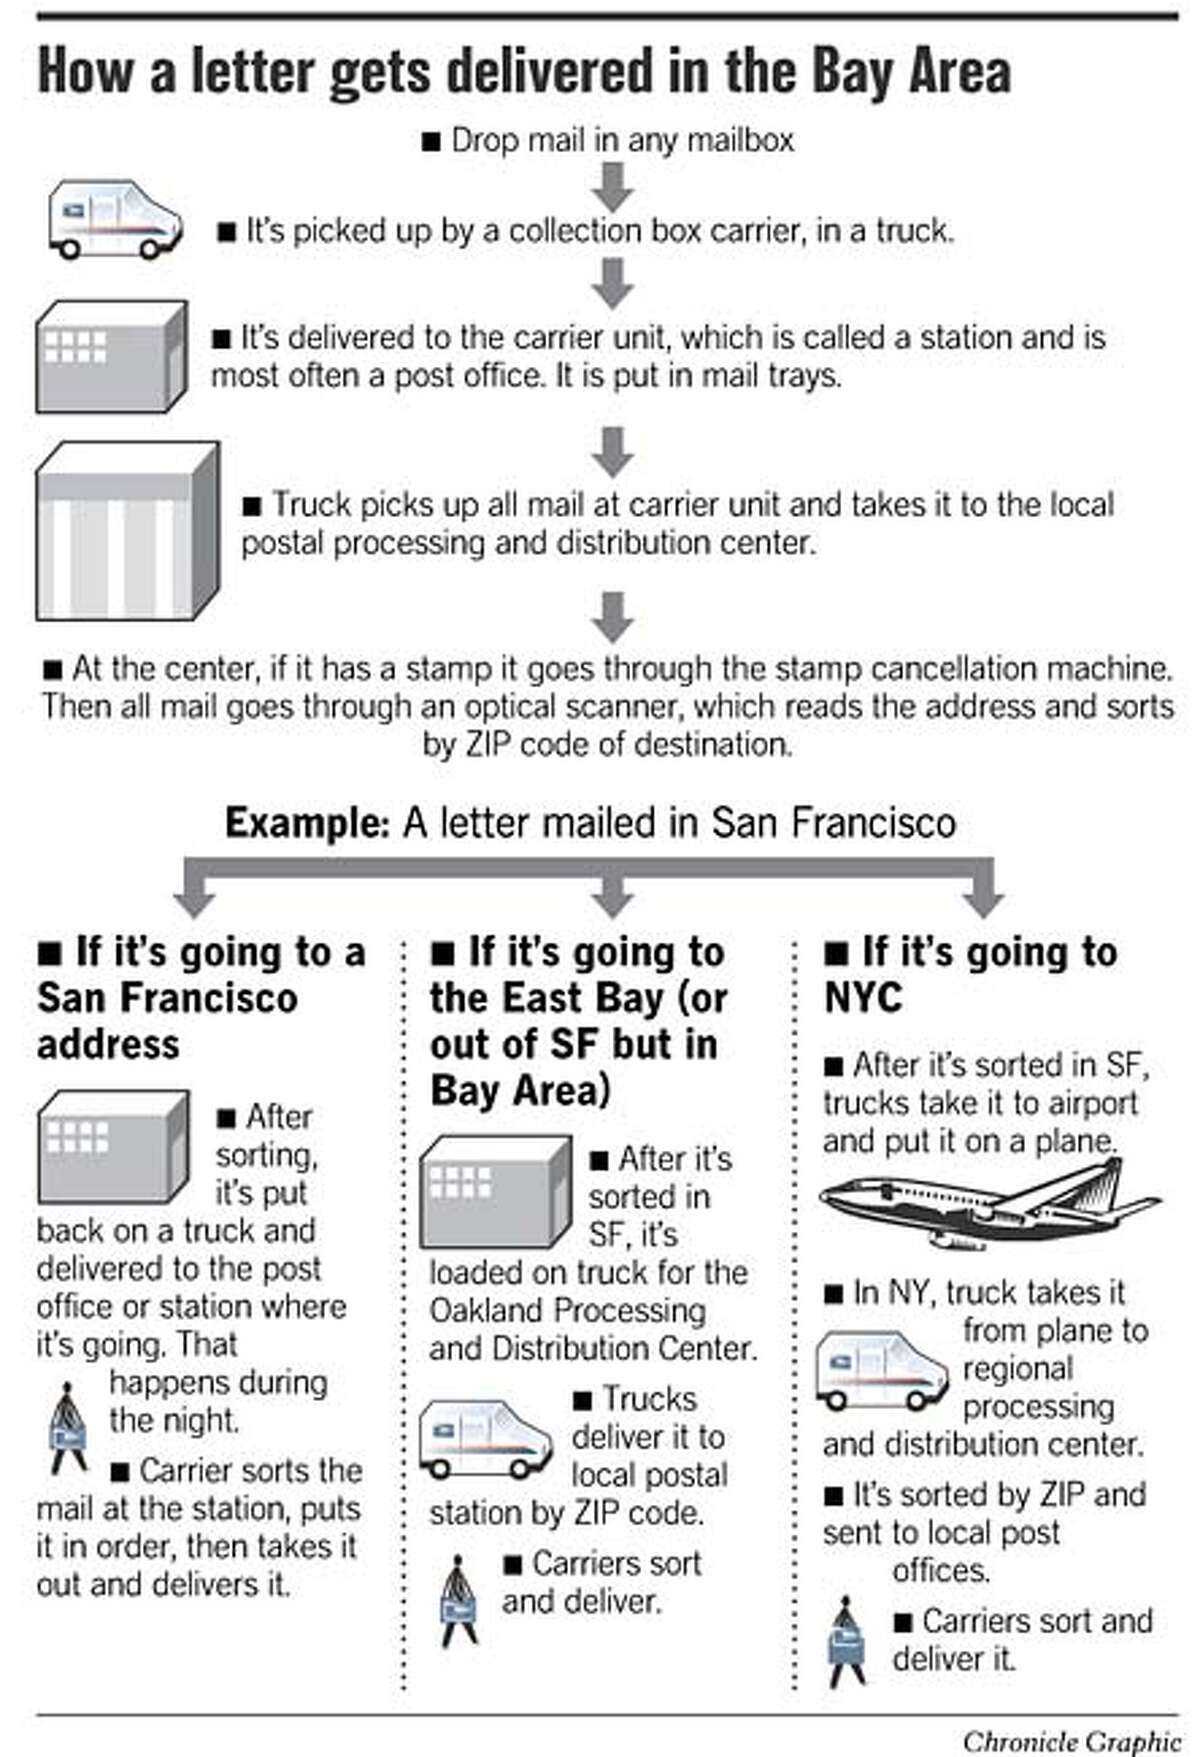 How a Letter Gets Delivered to the Bay Area. Chronicle Graphic